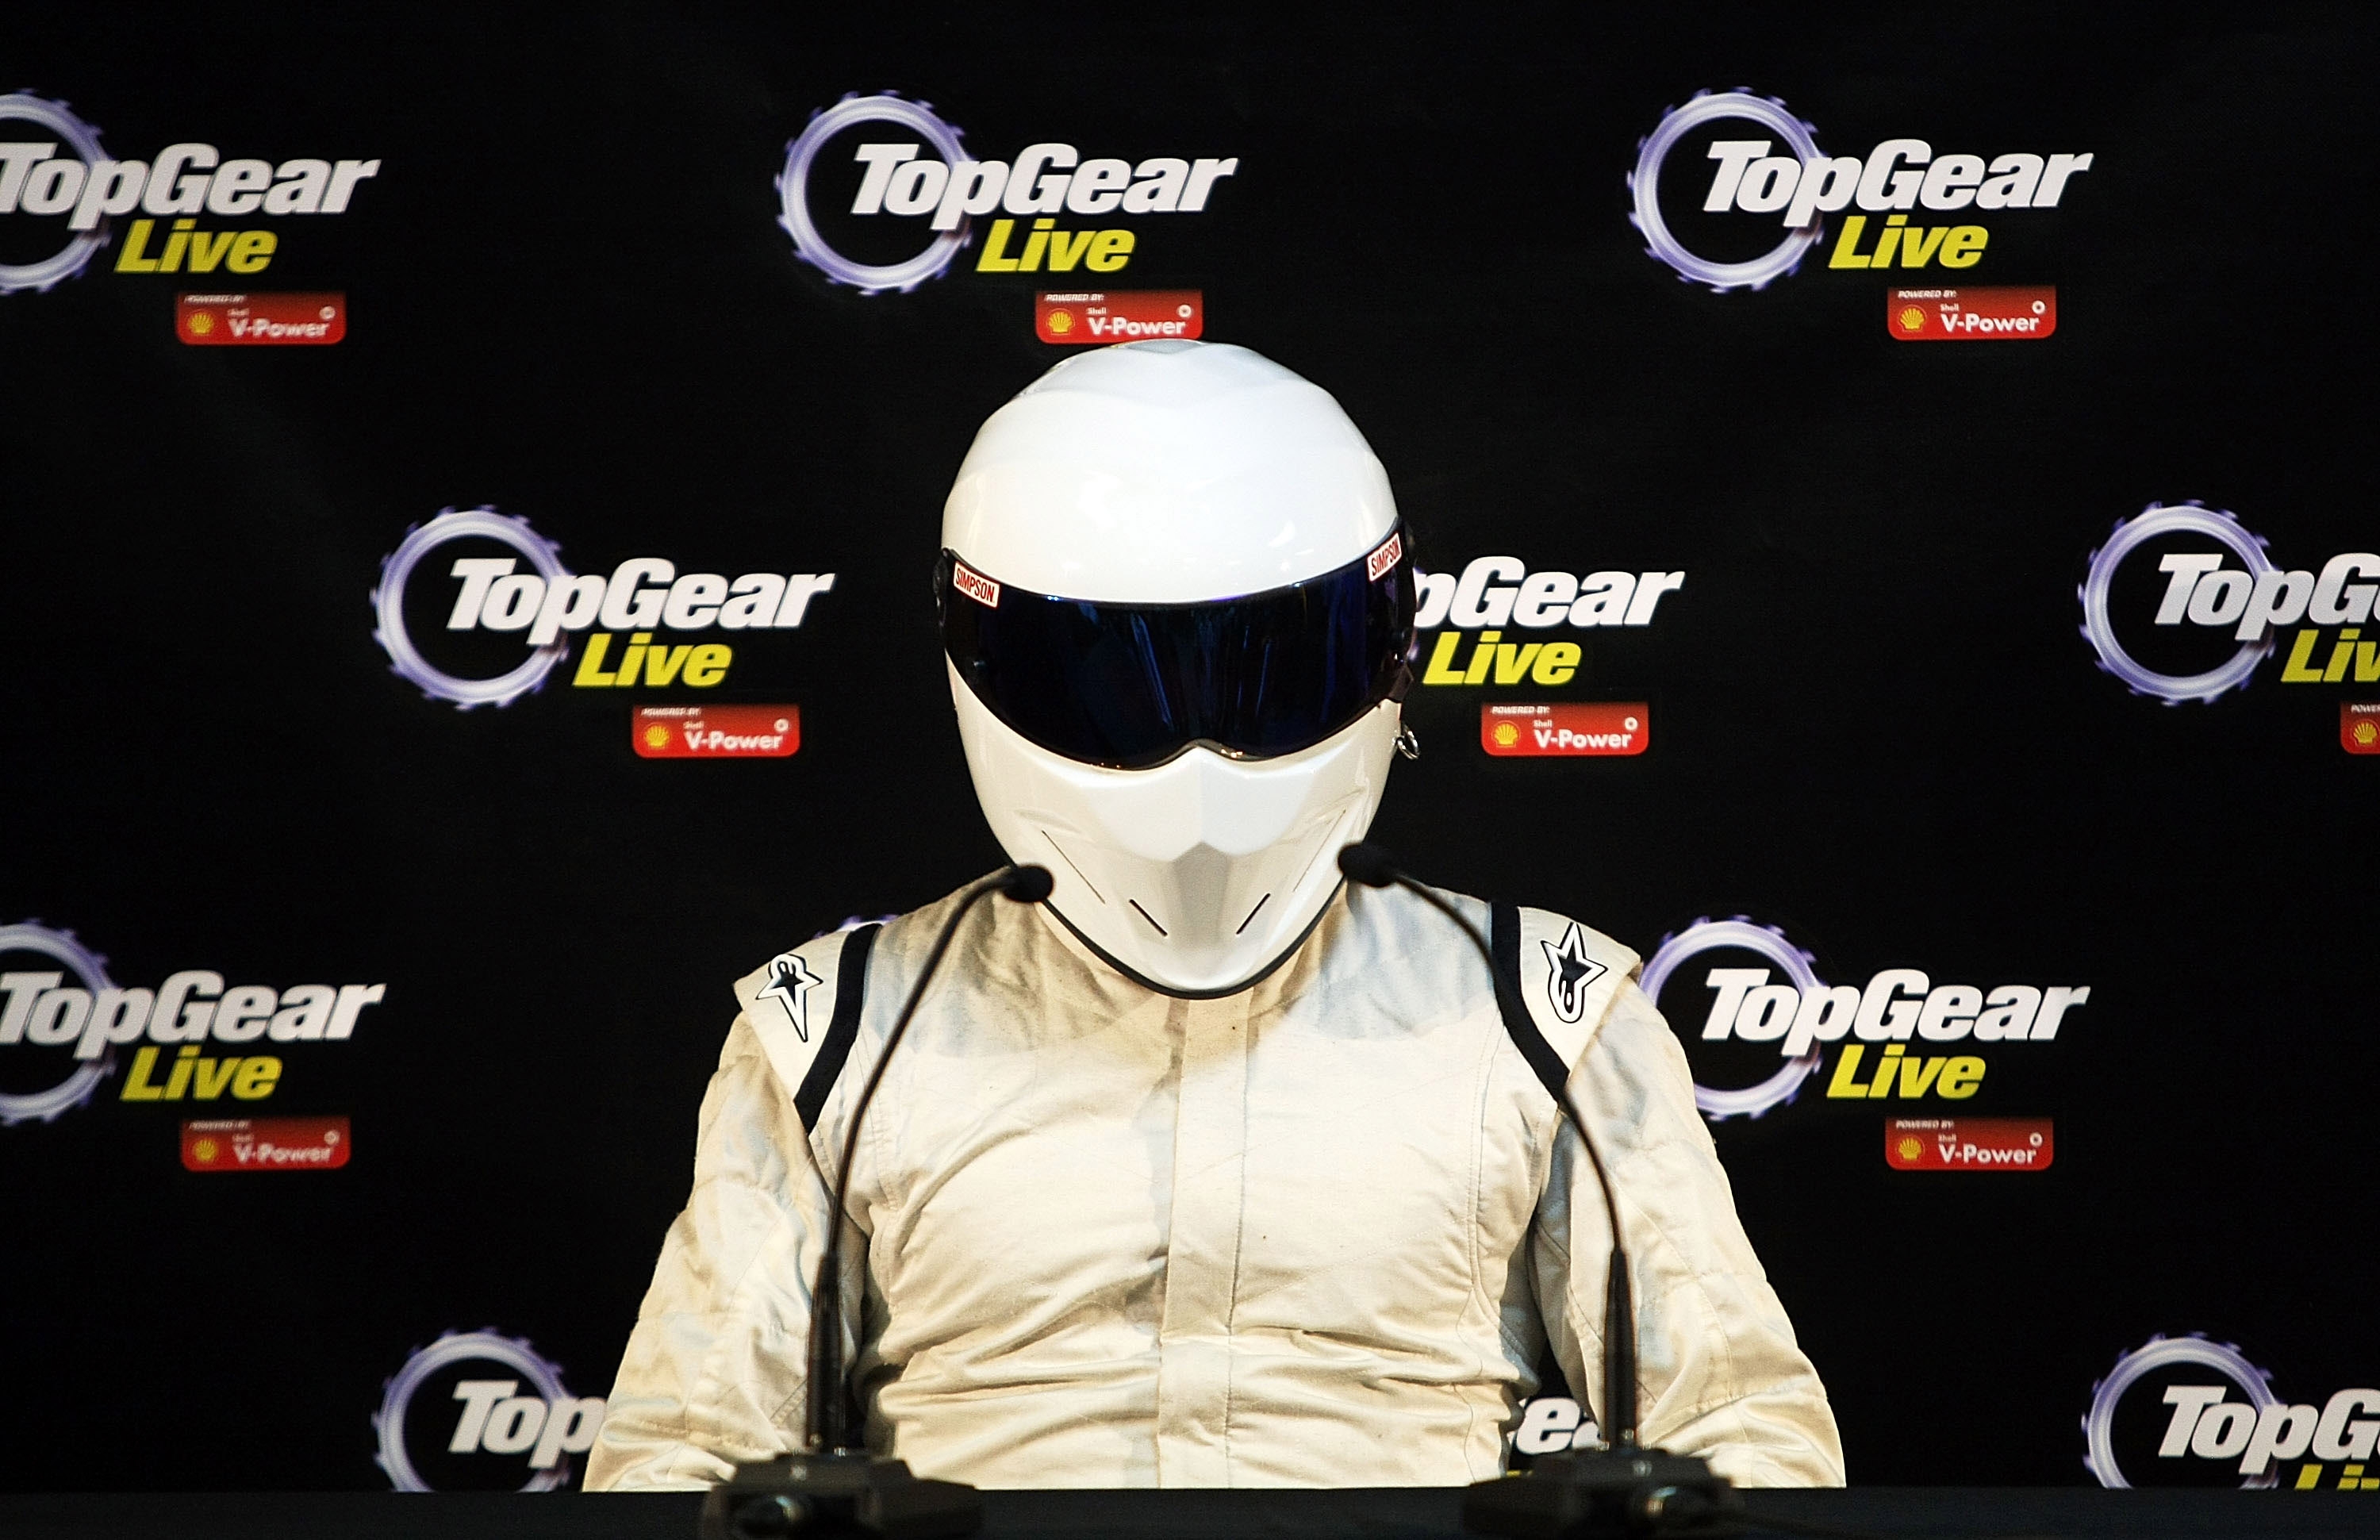 Could The Stig's theme park cousin have a ride at the new BBC theme park?